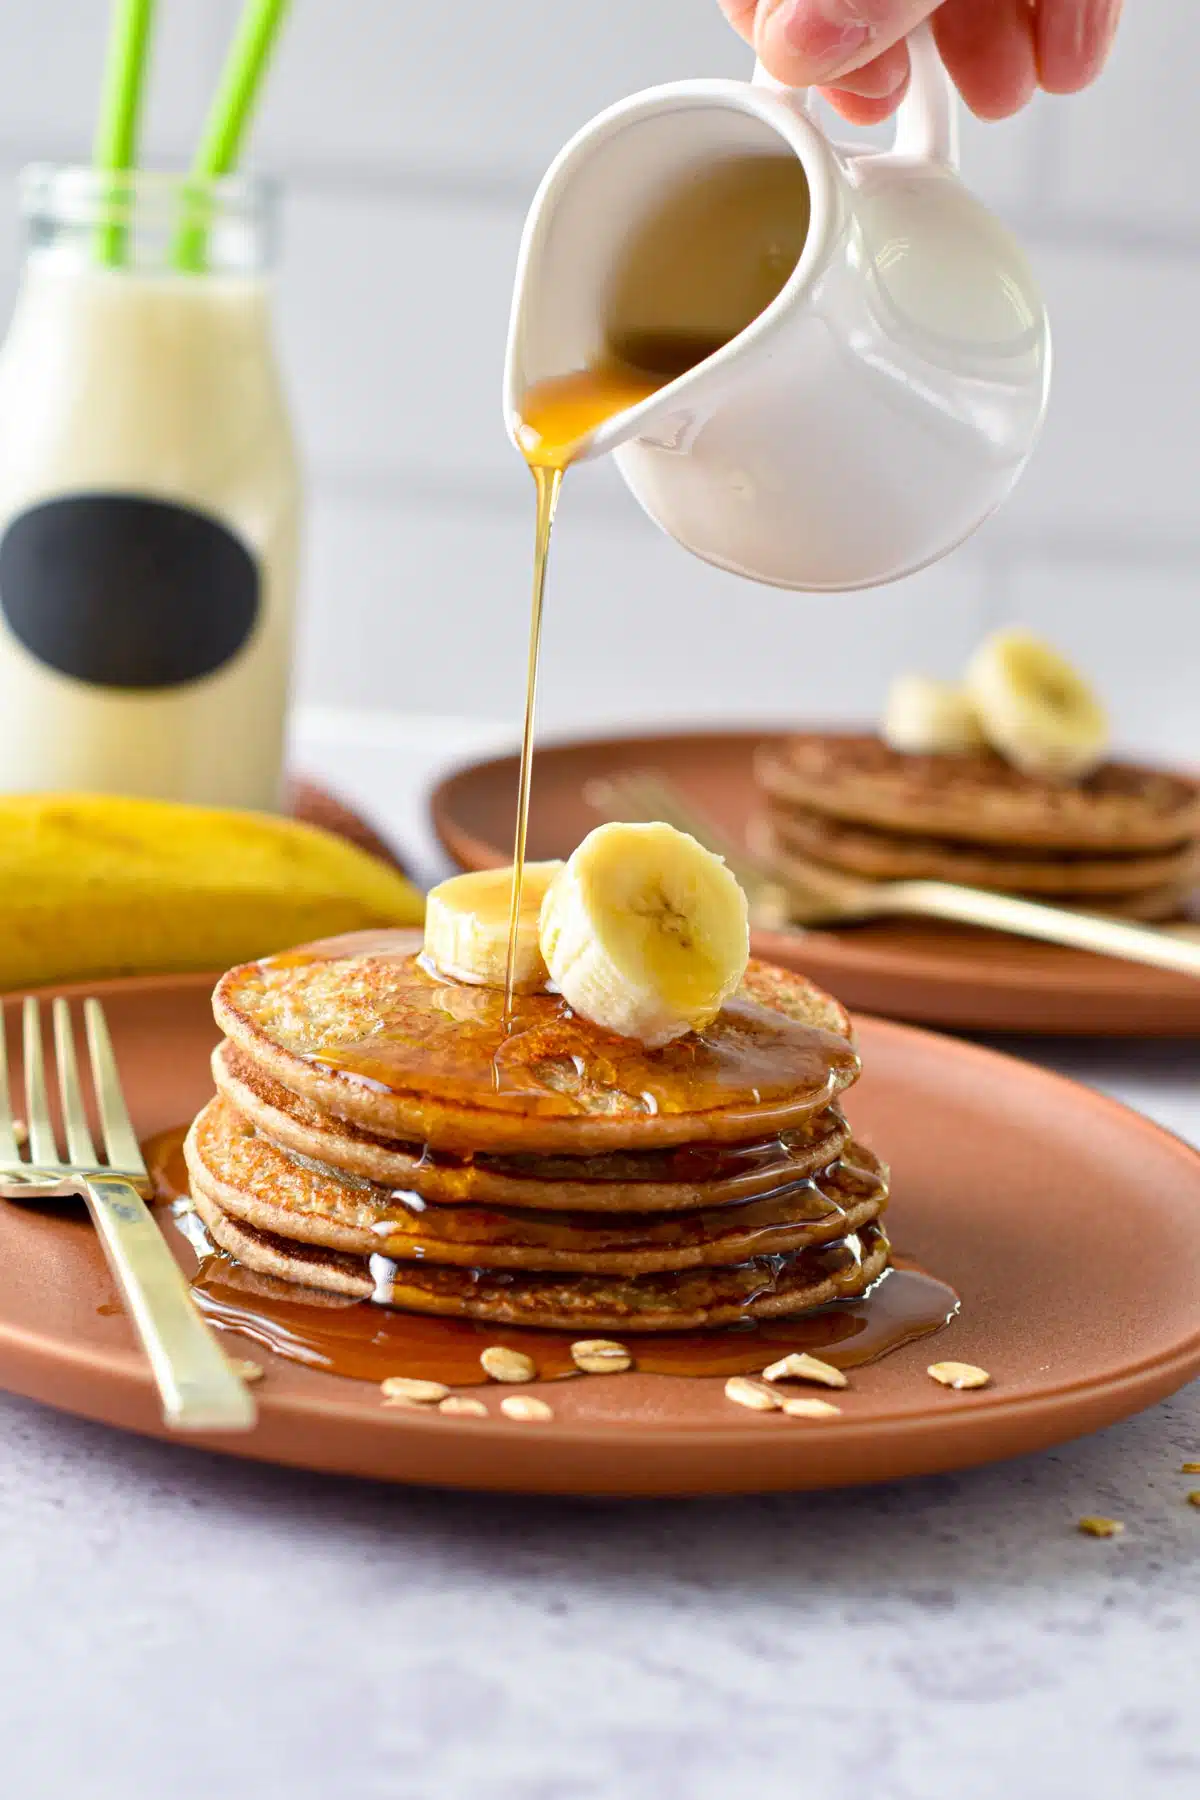 These 3 ingredient Banana Oat Pancakes are the easiest banana pancakes for breakfast packed with plant-based proteins from oats and flourless, simply made from oats and no eggs needed.